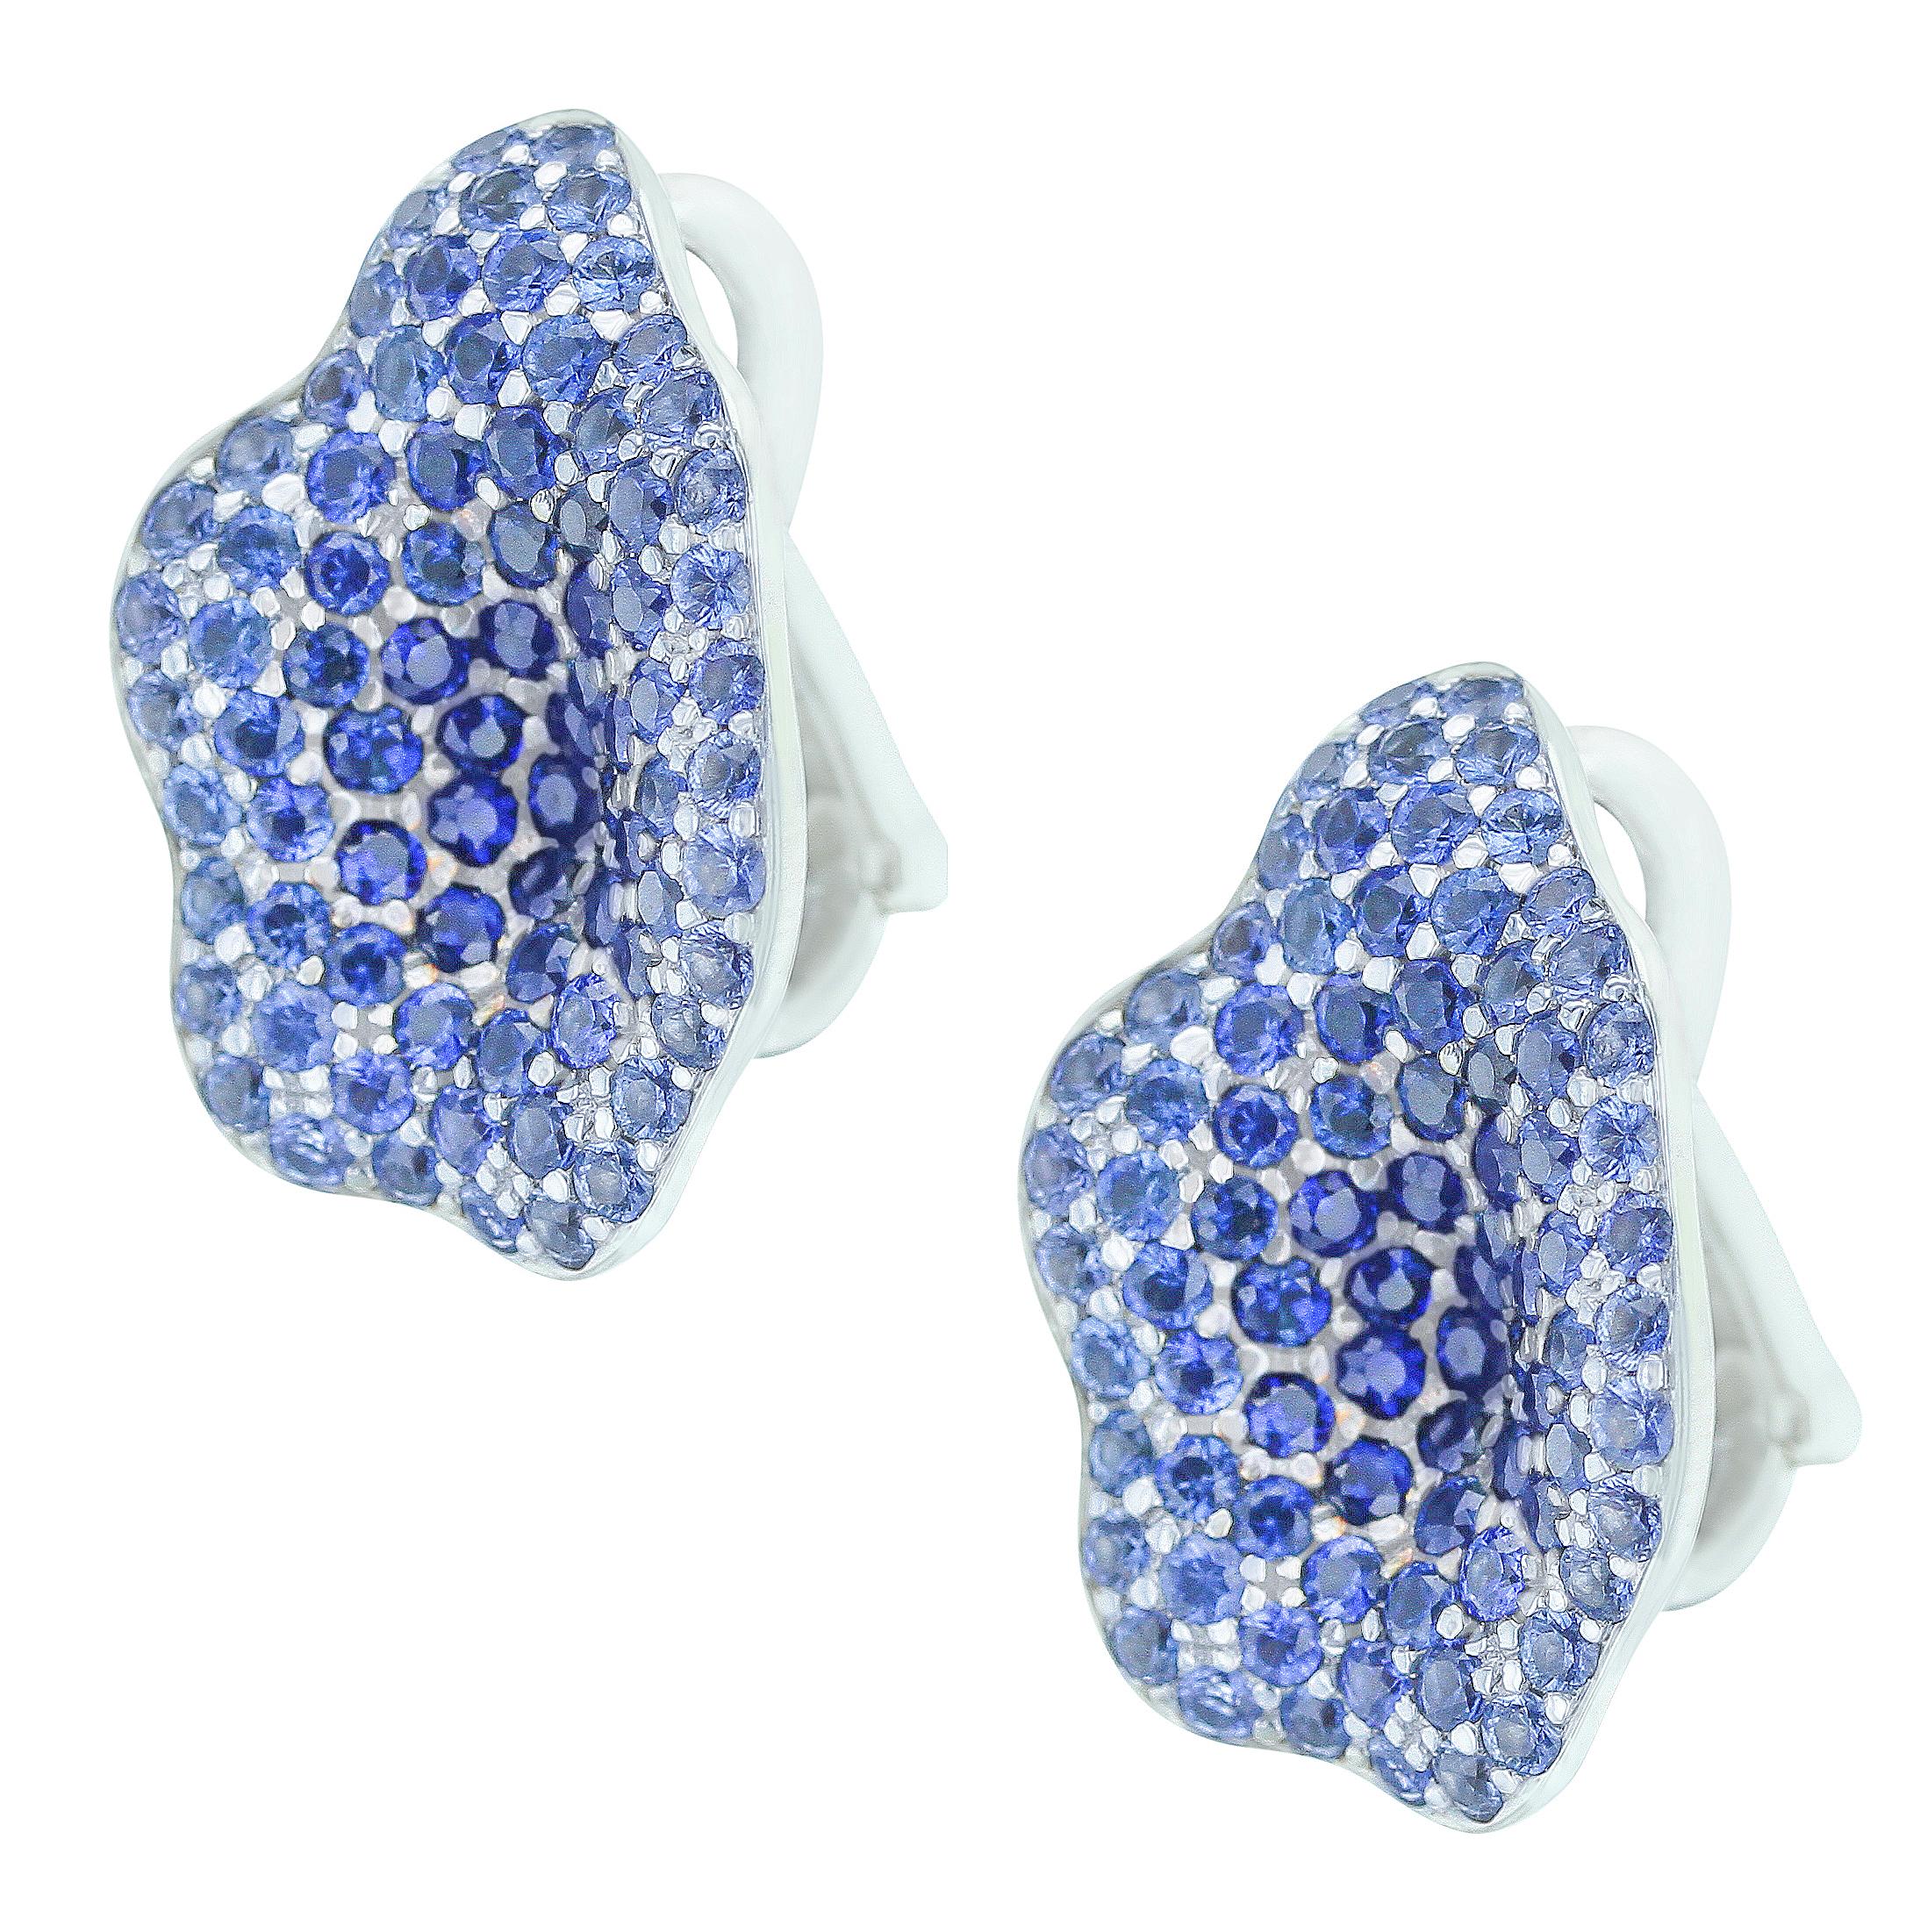 Stylish Floral Blue Sapphire Earrings, 18 Karat White Gold Part of Jewelry Set 1